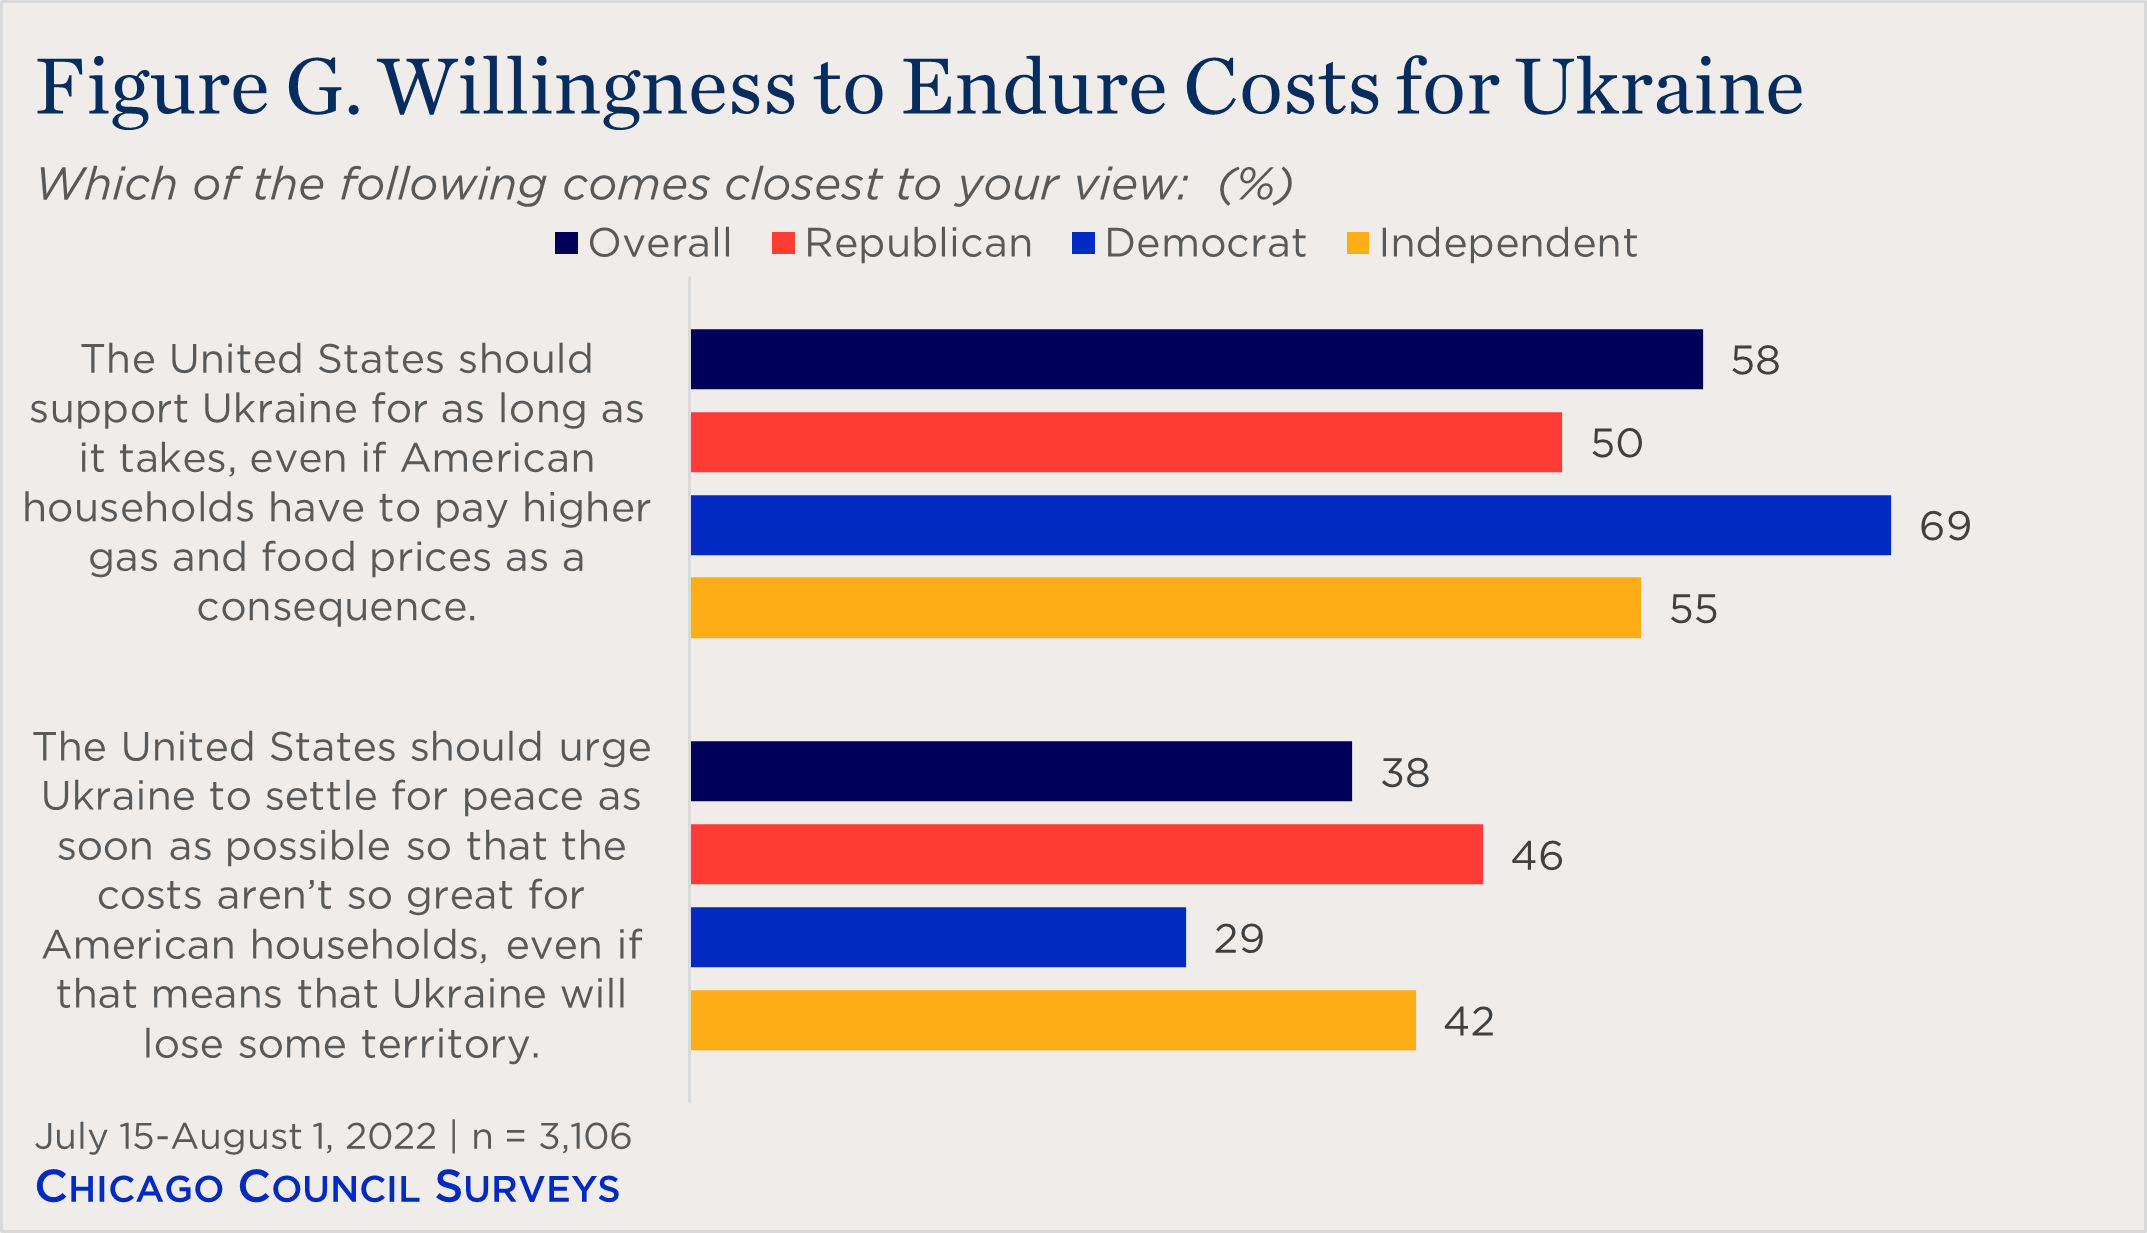 "bar chart showing partisan willingness to endure costs for Ukraine"